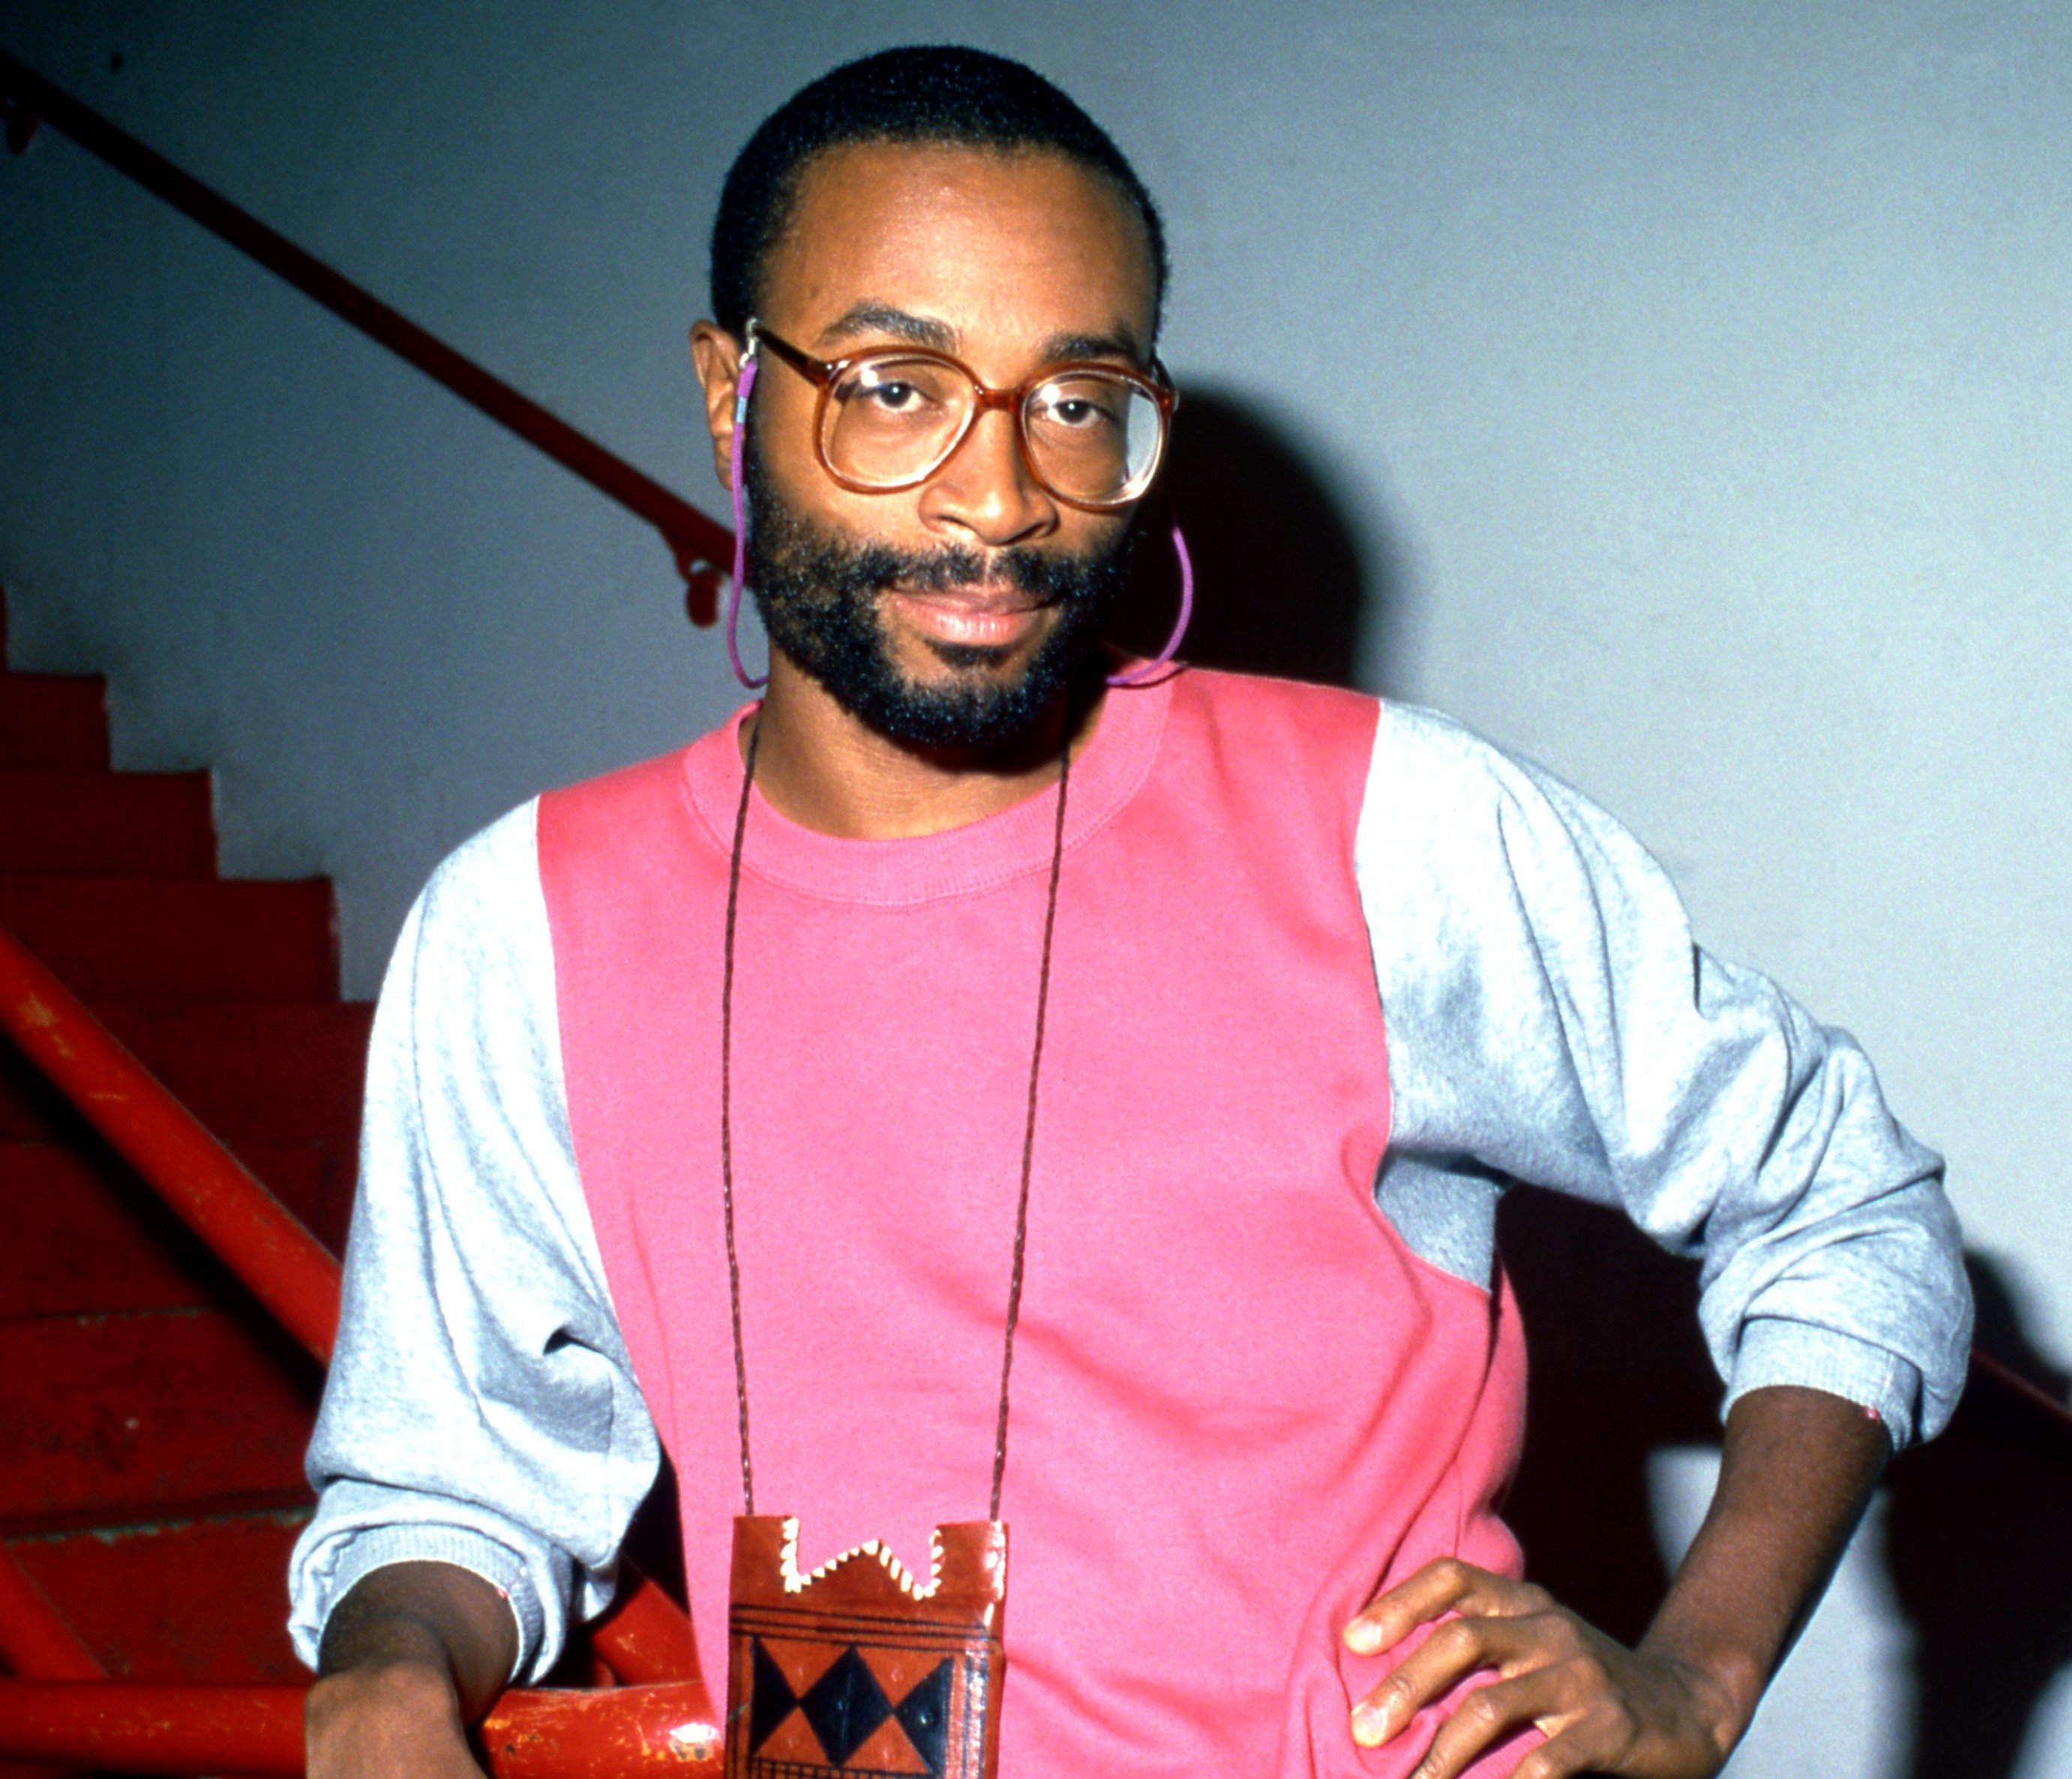 "Don't Worry, Be Happy" singer Bobby McFerrin wearing pink